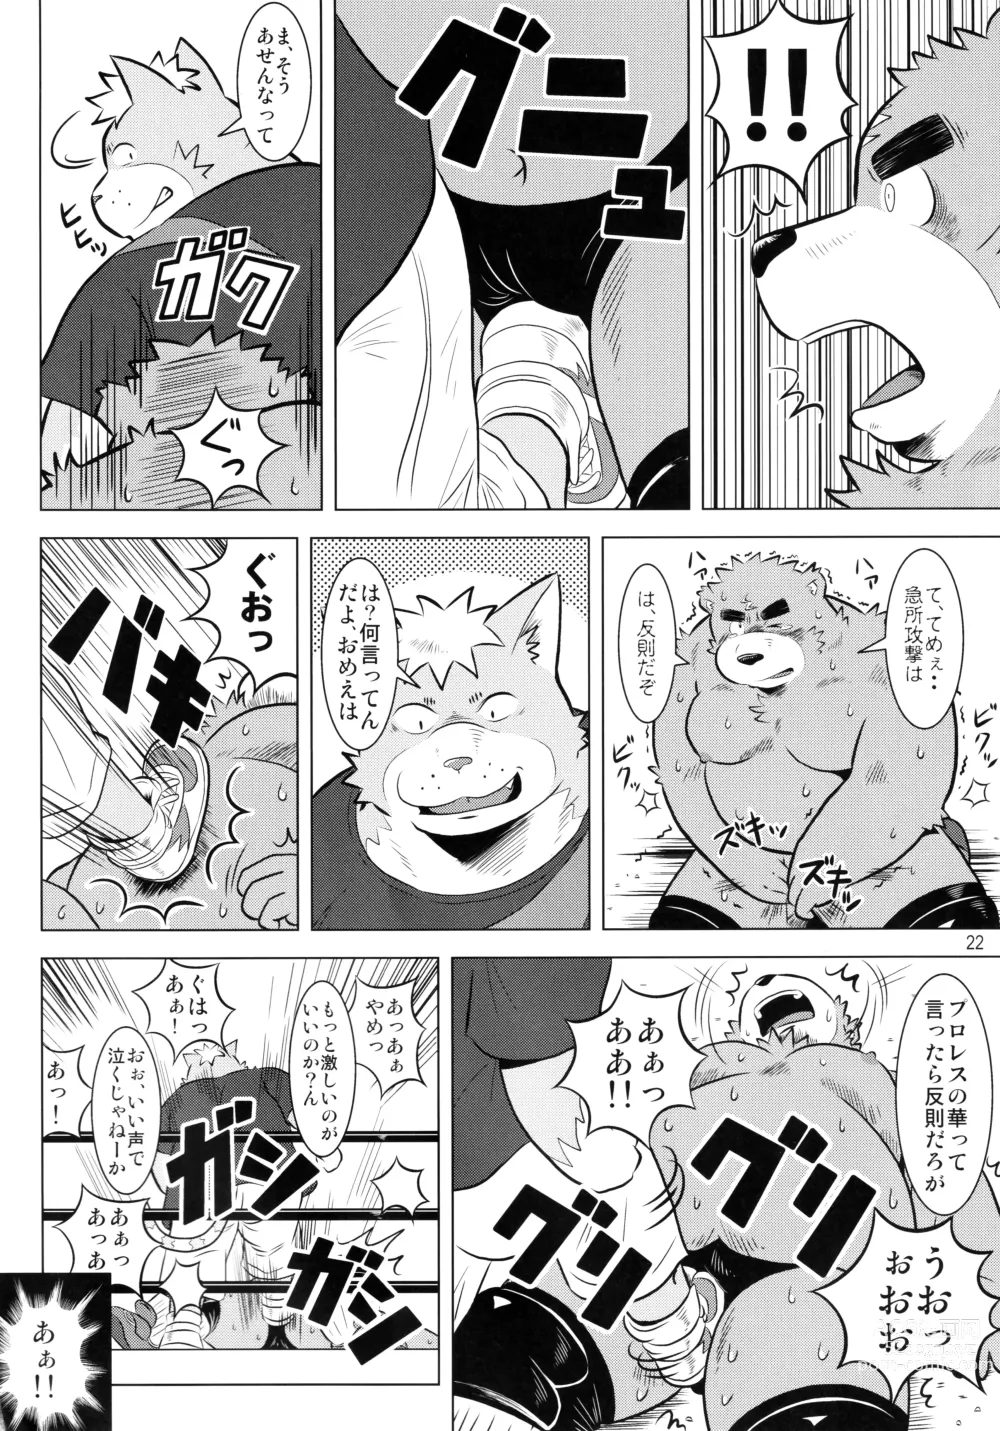 Page 23 of doujinshi BFW -BEAST FIGHTER WRESTLING-